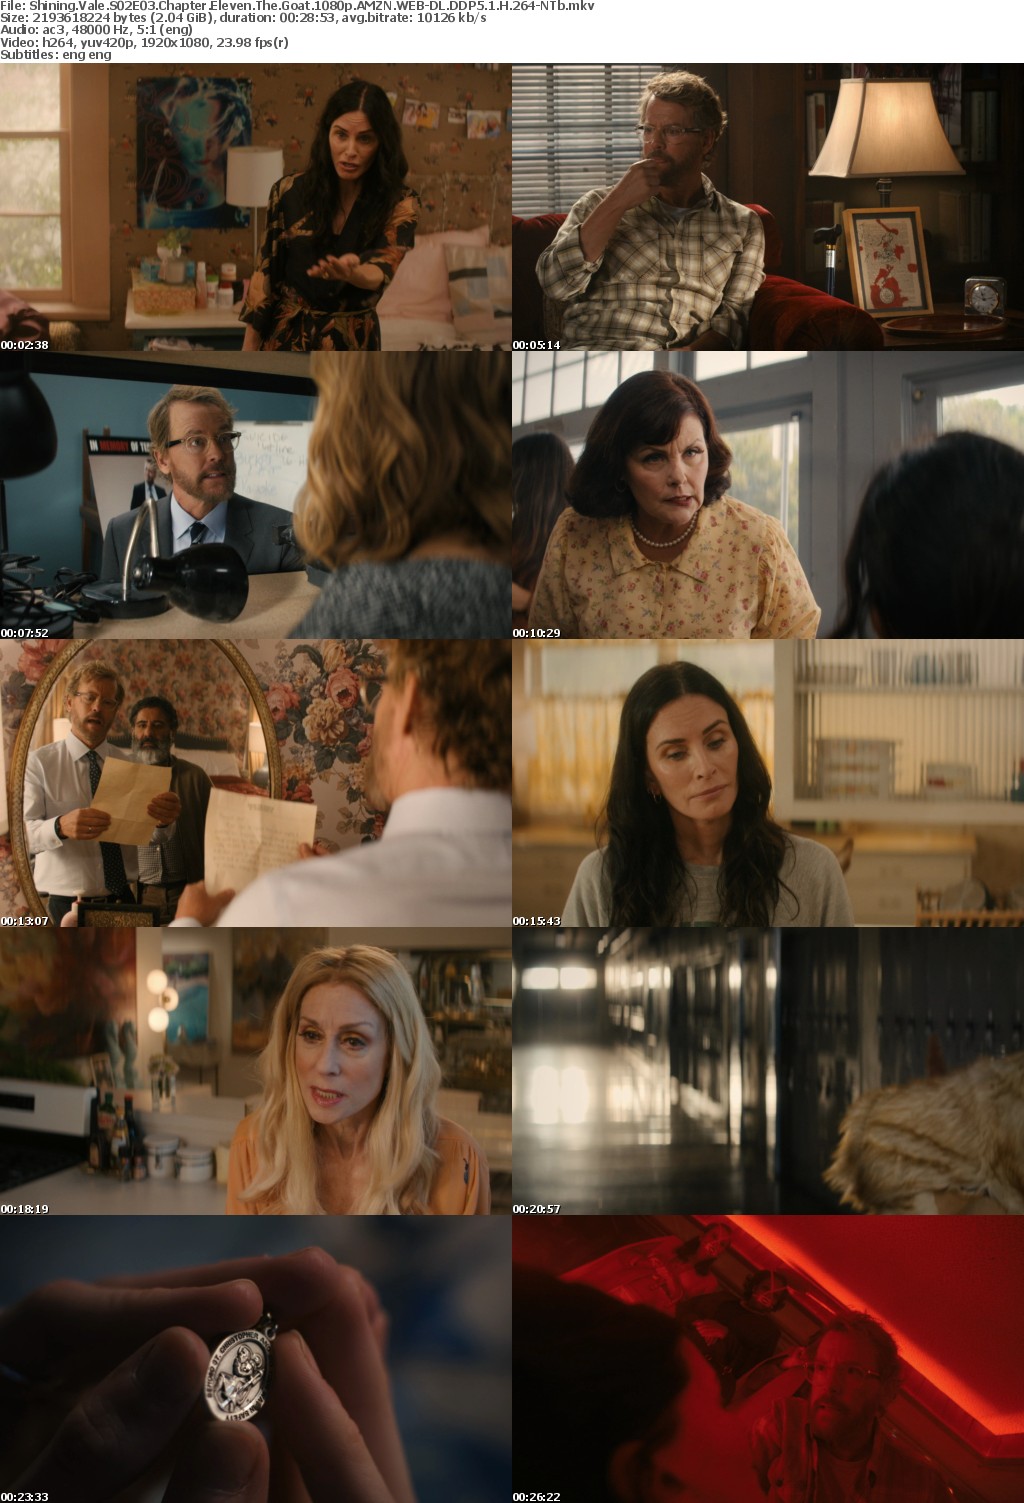 Shining Vale S02E03 Chapter Eleven The Goat 1080p AMZN WEB-DL DDP5 1 H 264-NTb